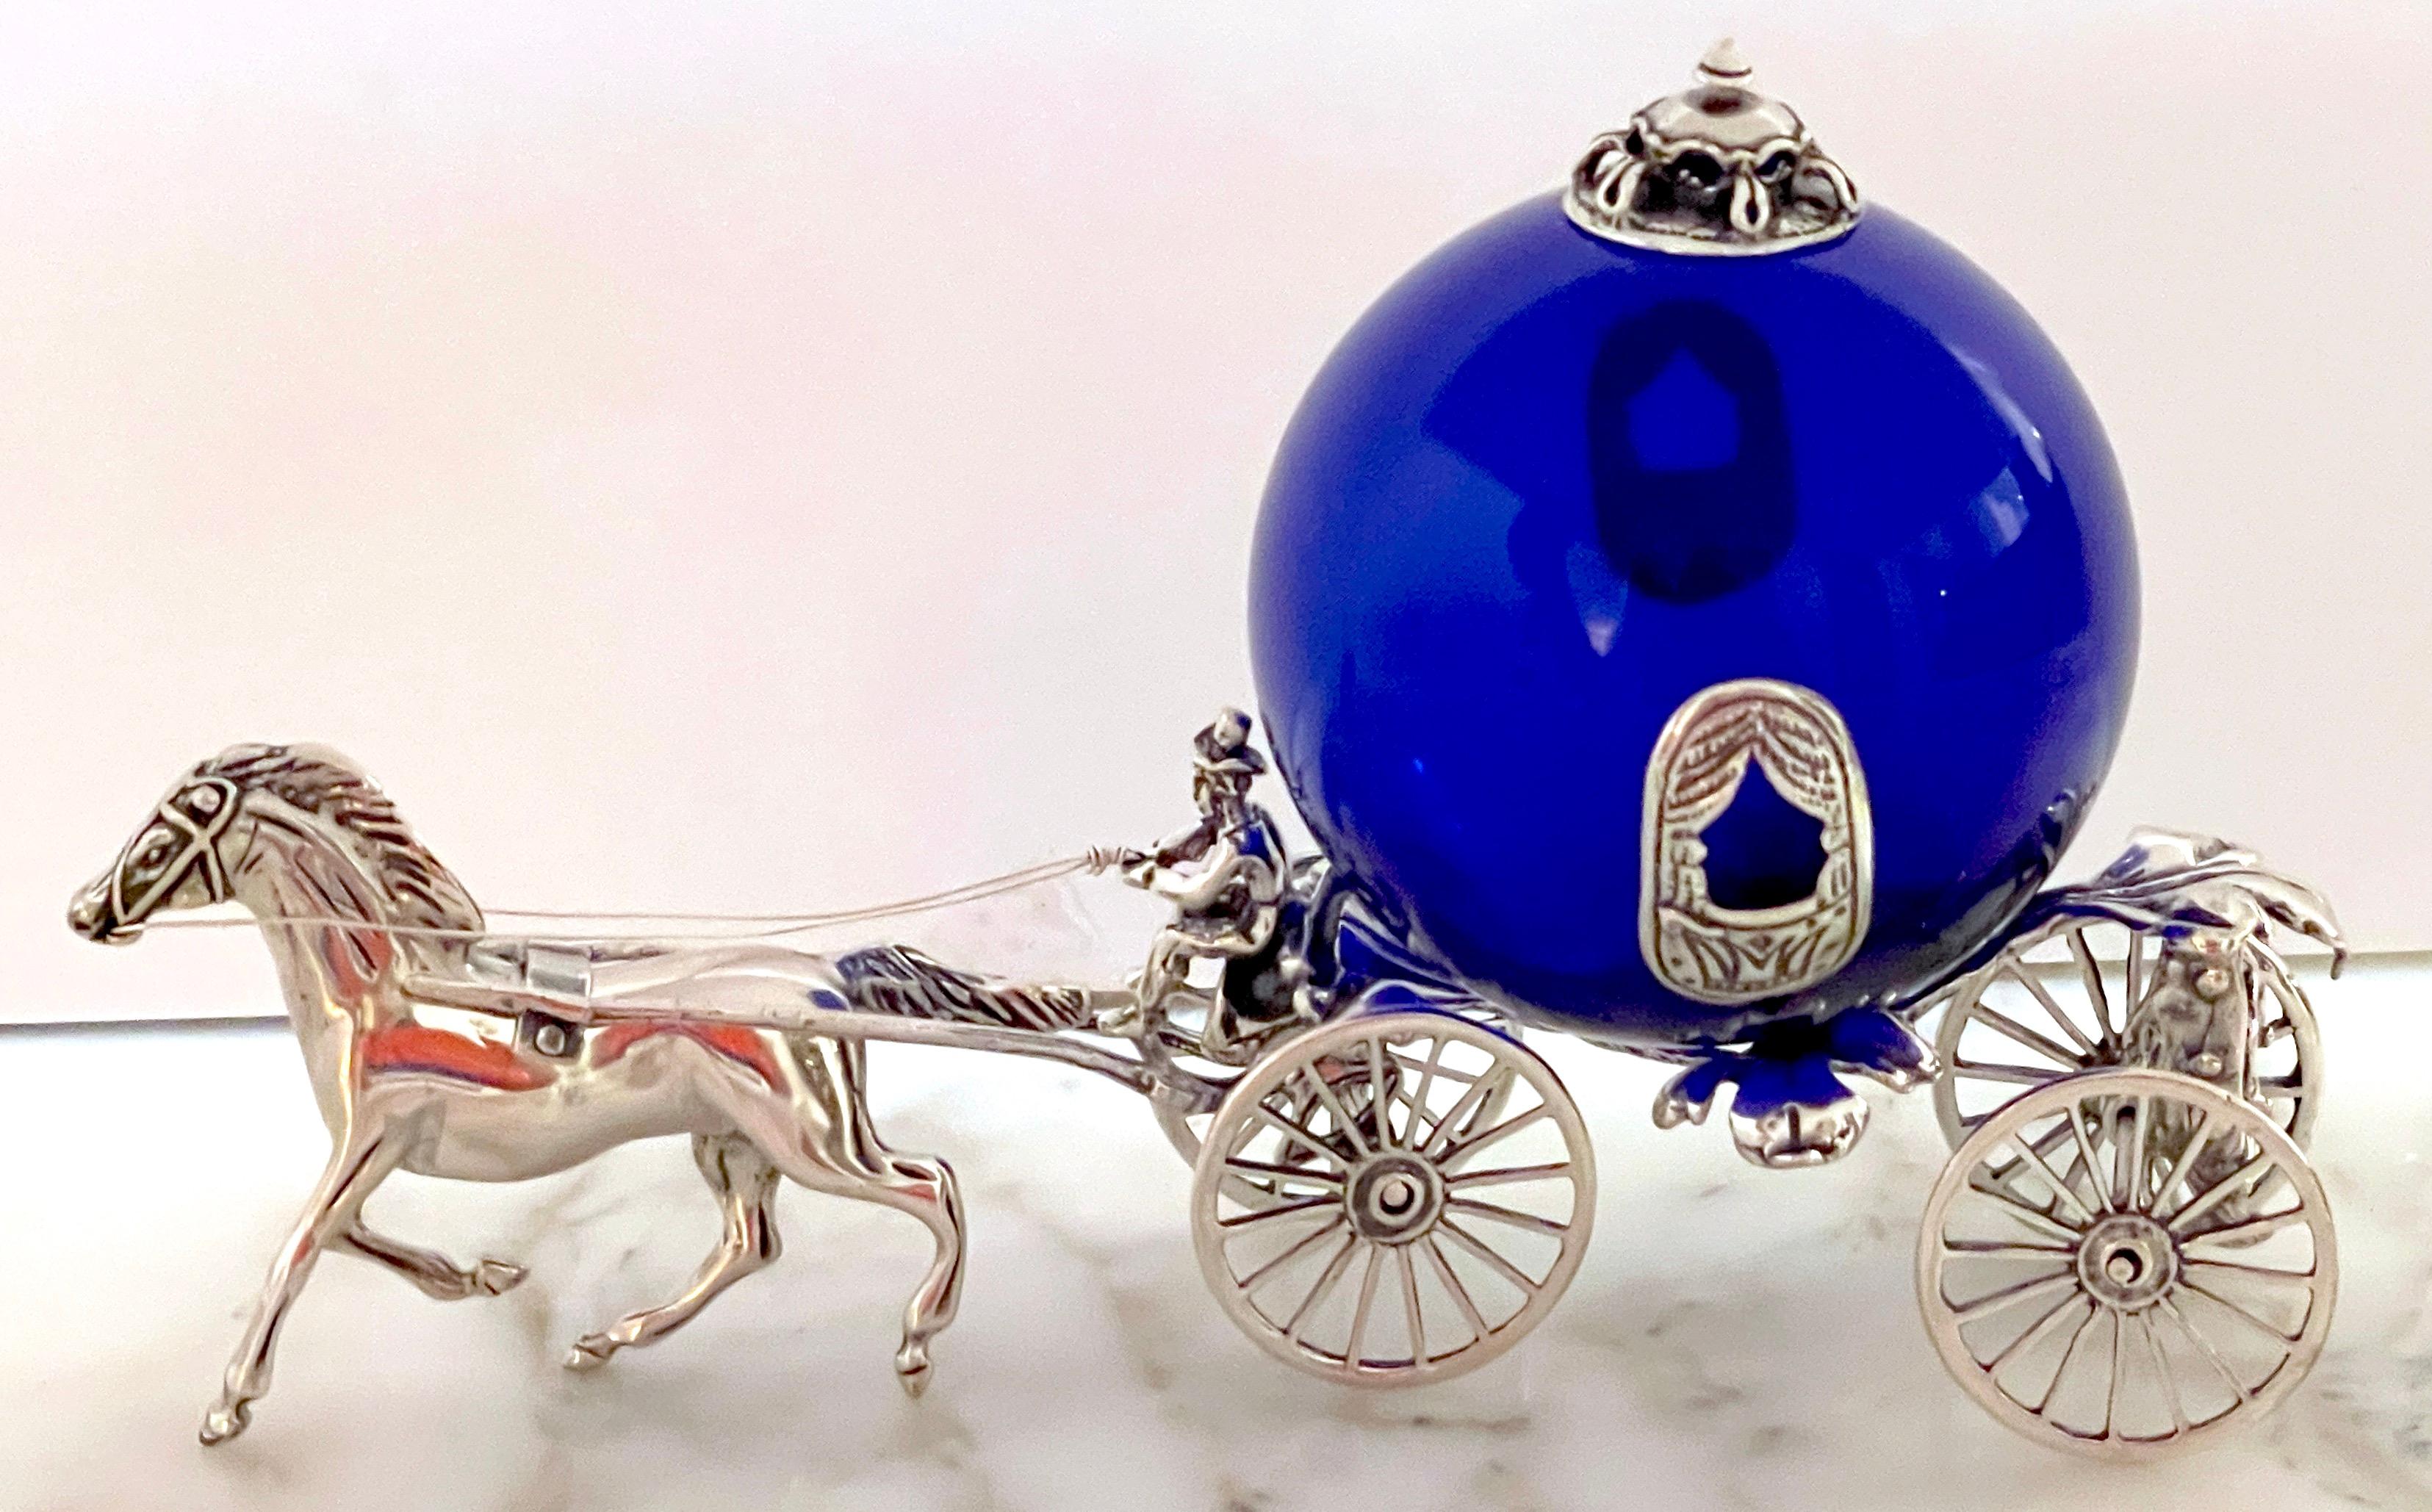 Italian Sterling and Cobalt Murano Glass Fantasy Model of a Horse & Carriage 
Italy, late 20th century 

A captivating Italian Sterling and Cobalt Murano Glass Fantasy Model of a Horse & Carriage, from the later 20th century, This remarkable piece